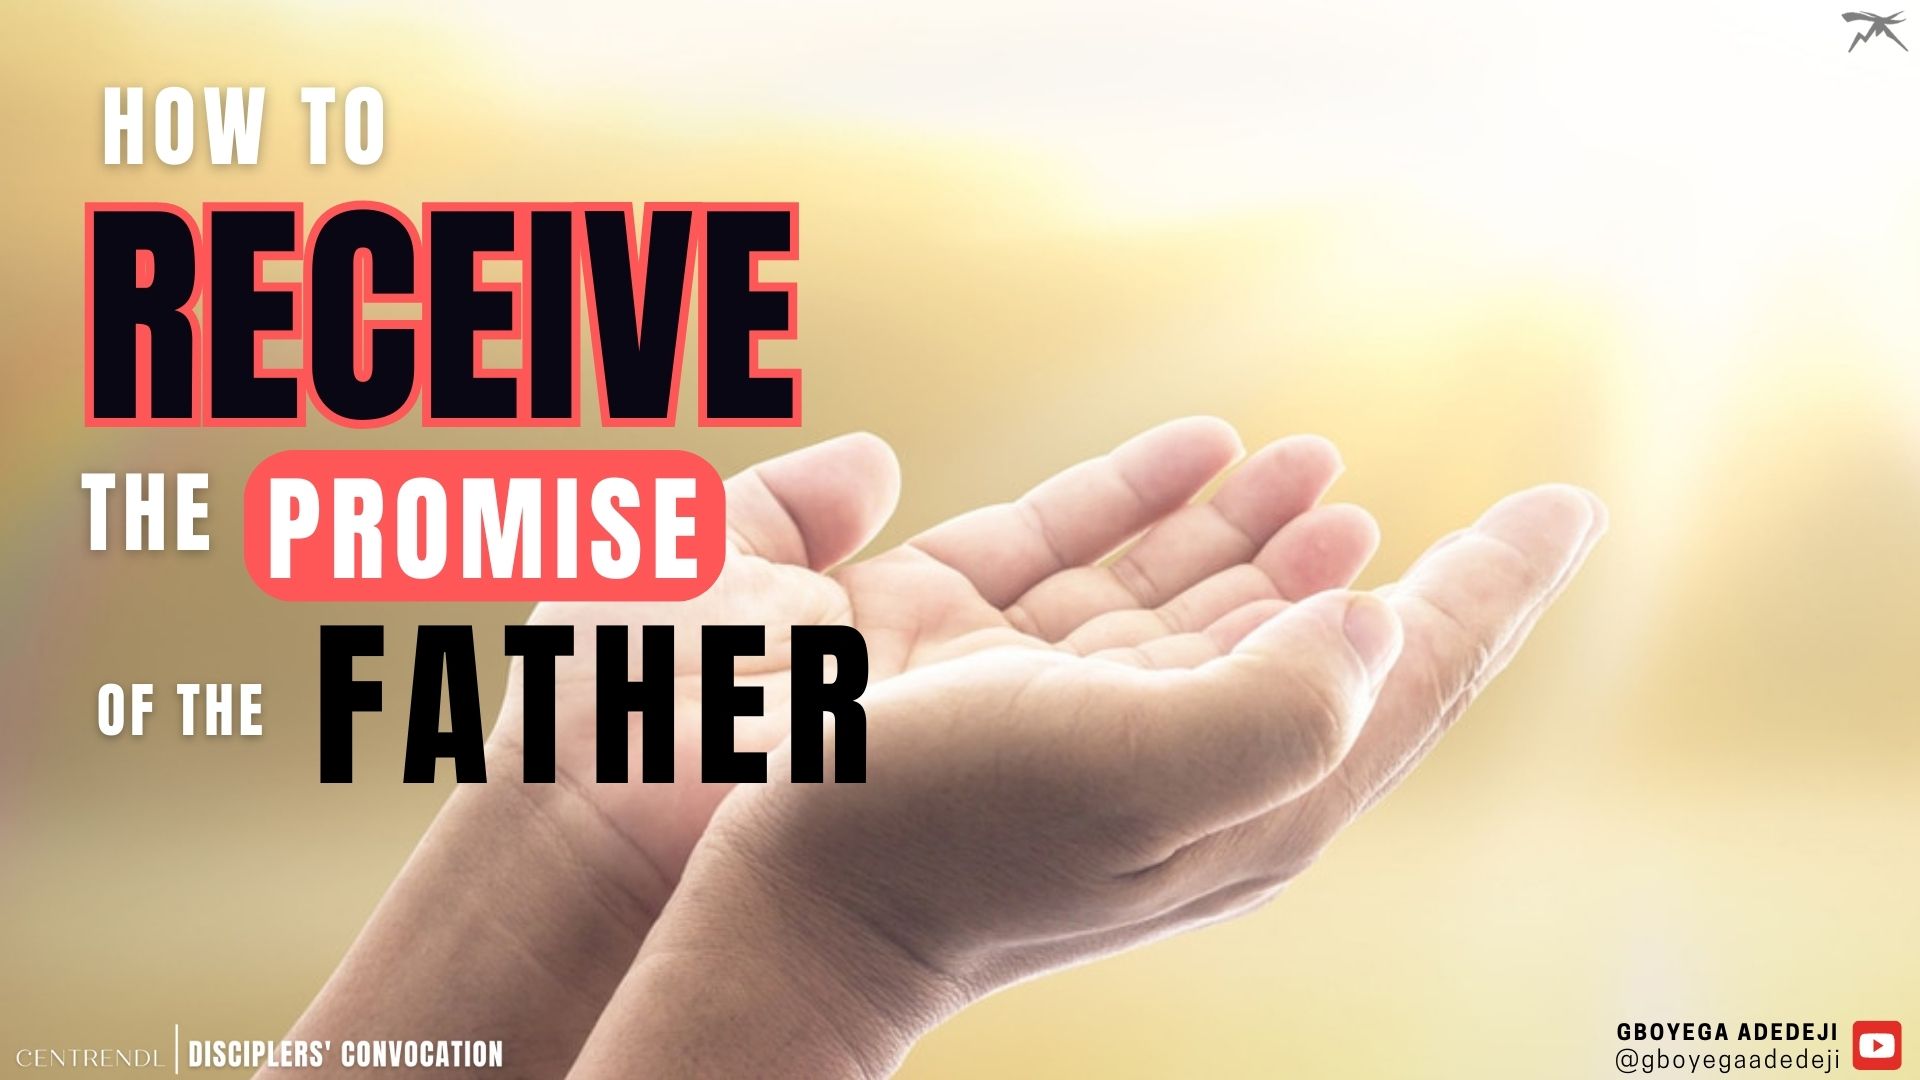 How To Receive The Promise of The Father